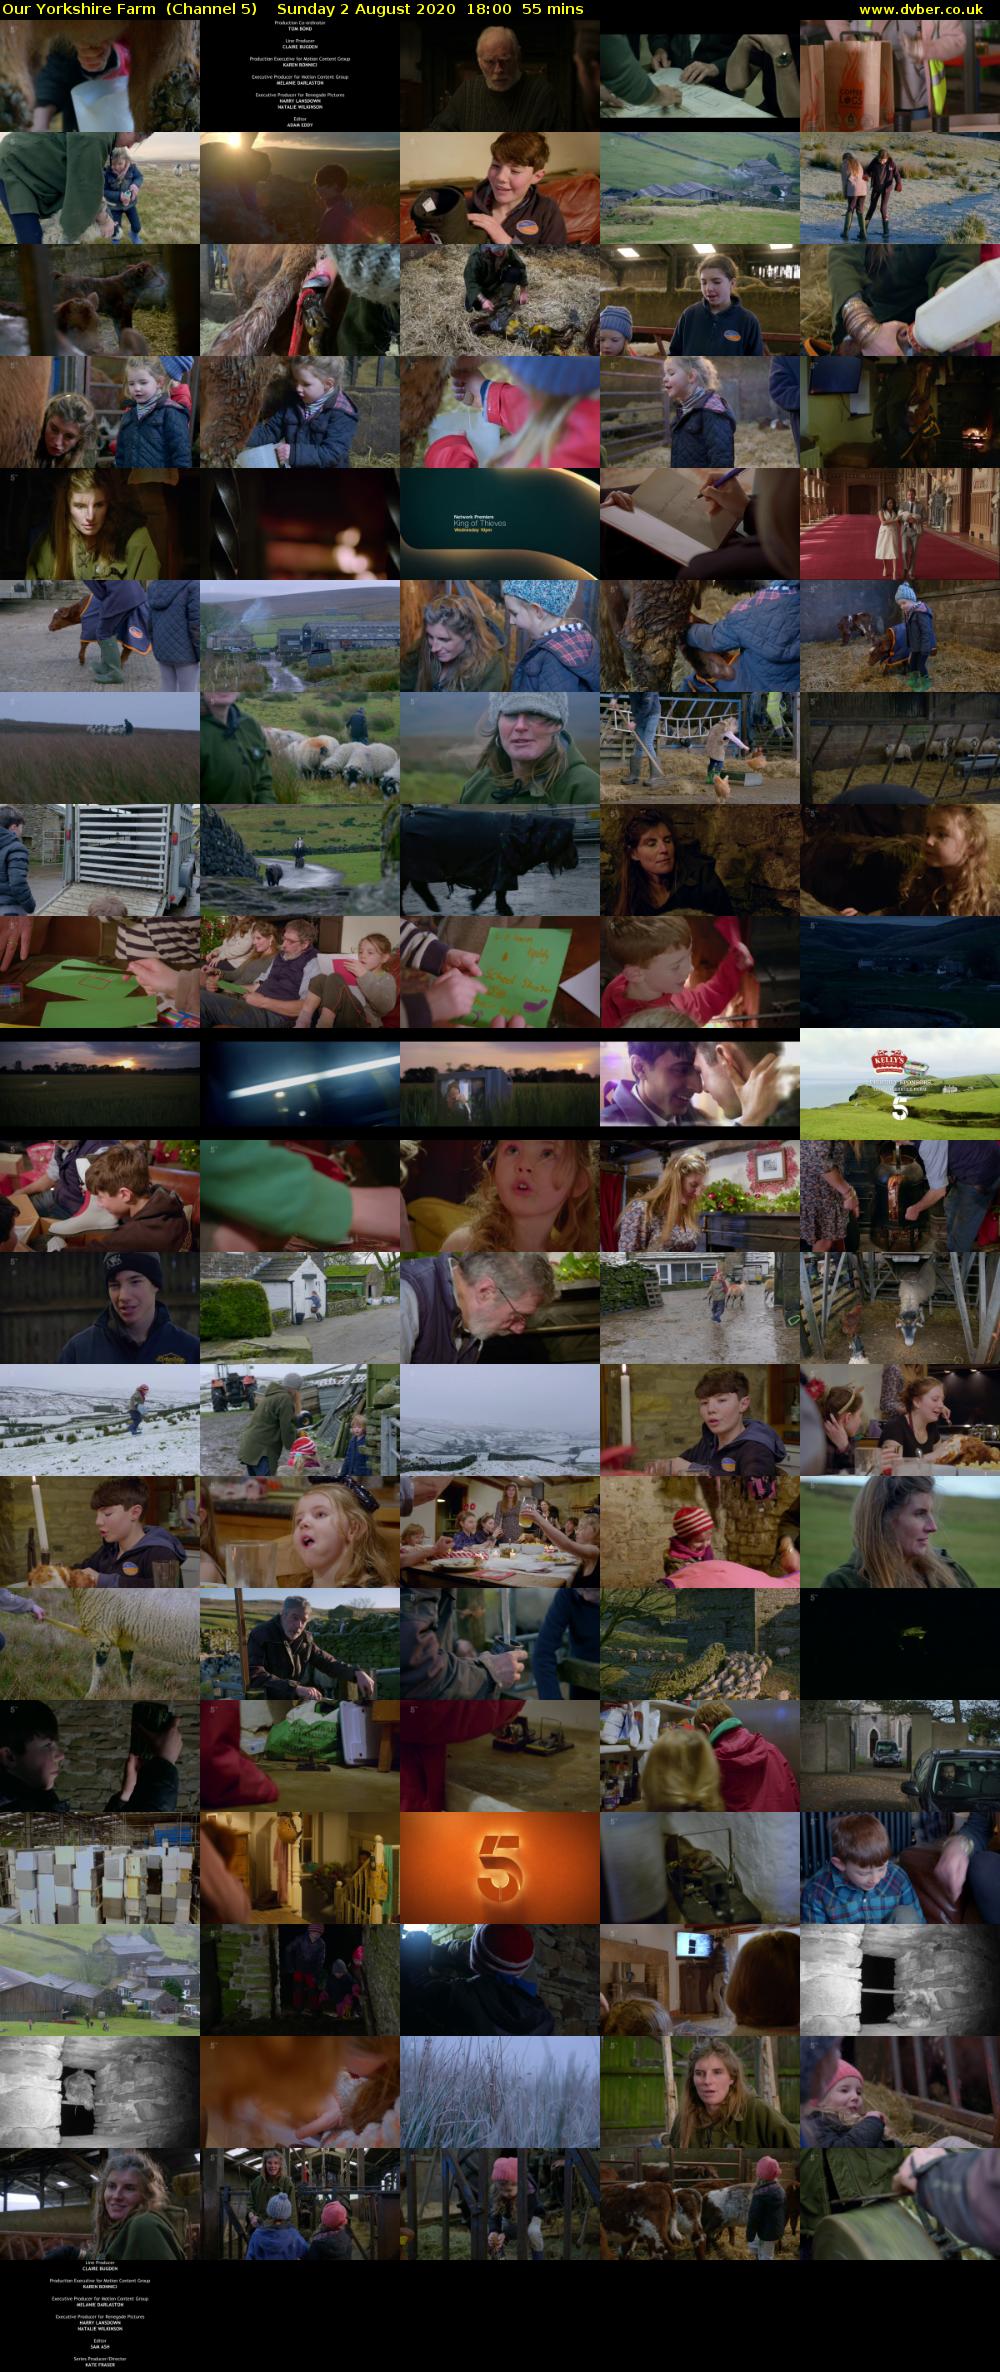 Our Yorkshire Farm  (Channel 5) Sunday 2 August 2020 18:00 - 18:55